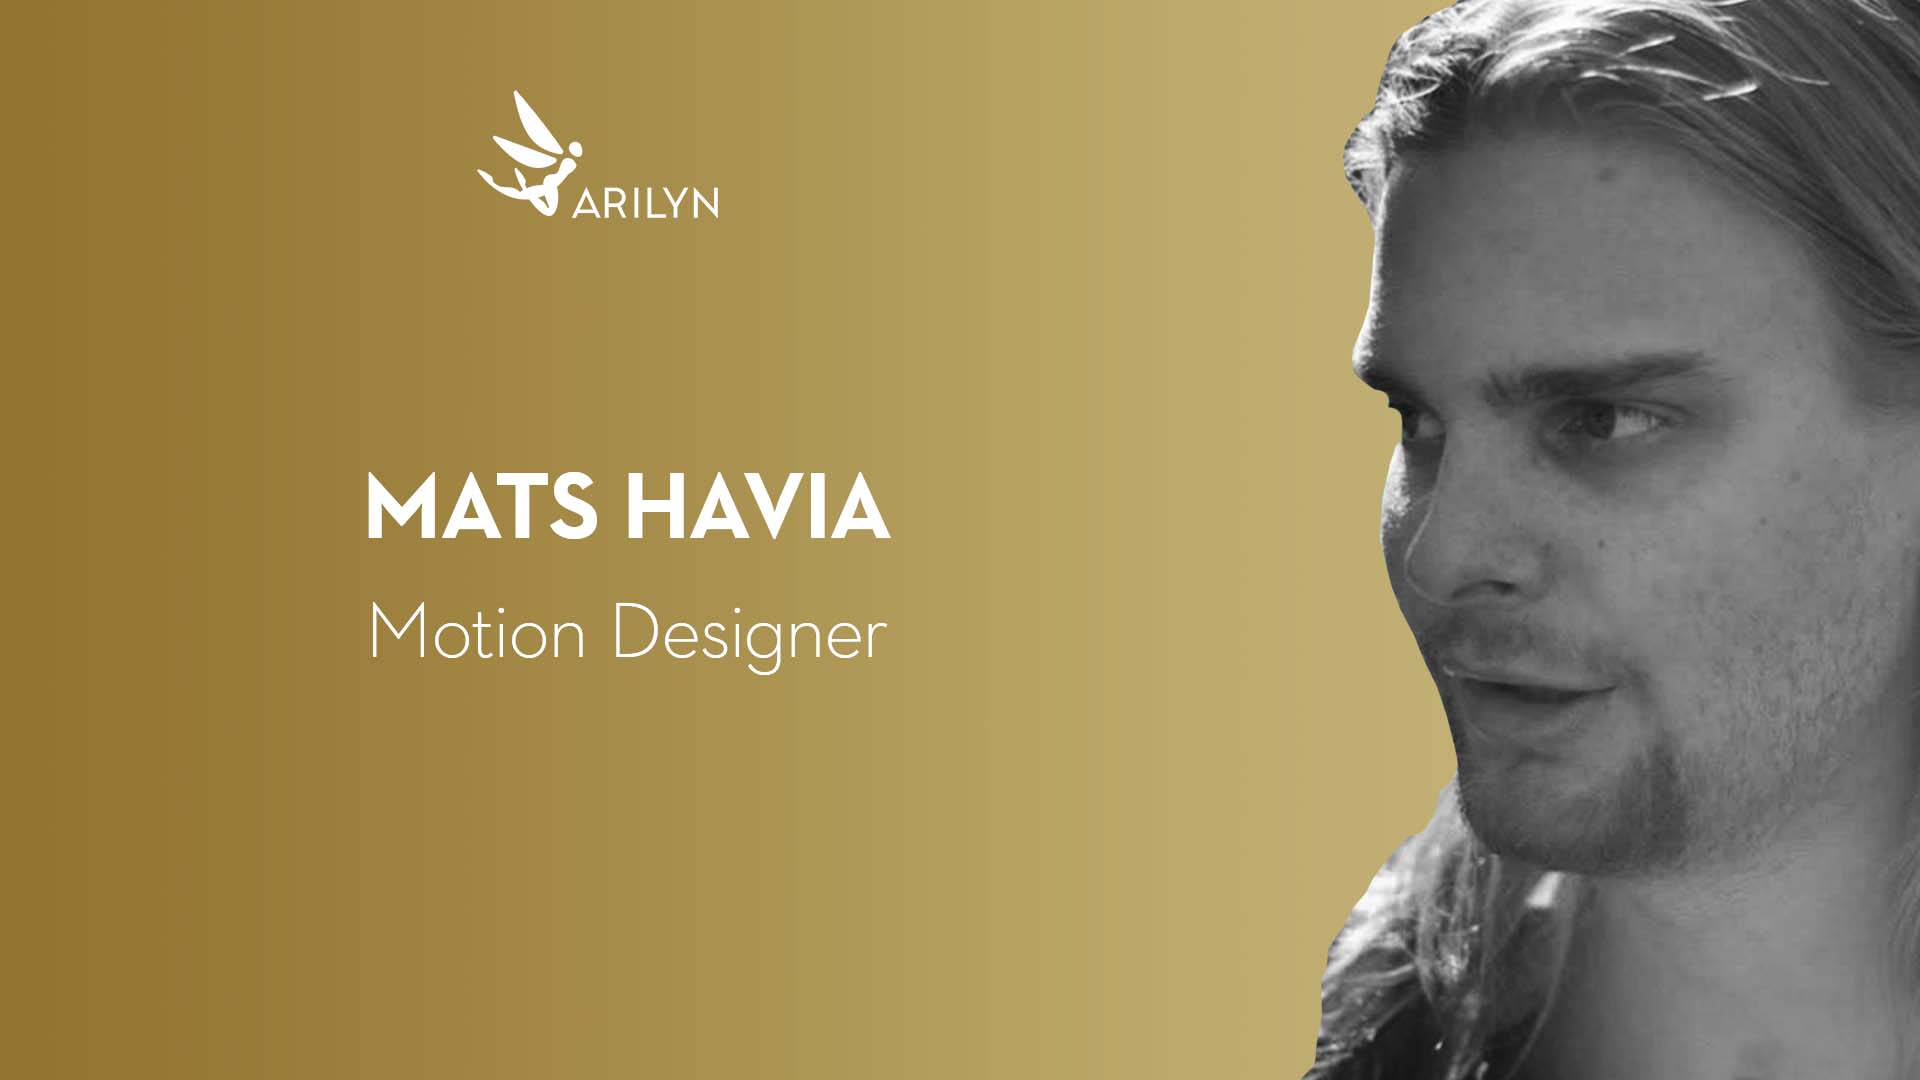 Get to know Arilyn – Mats, Motion Designer